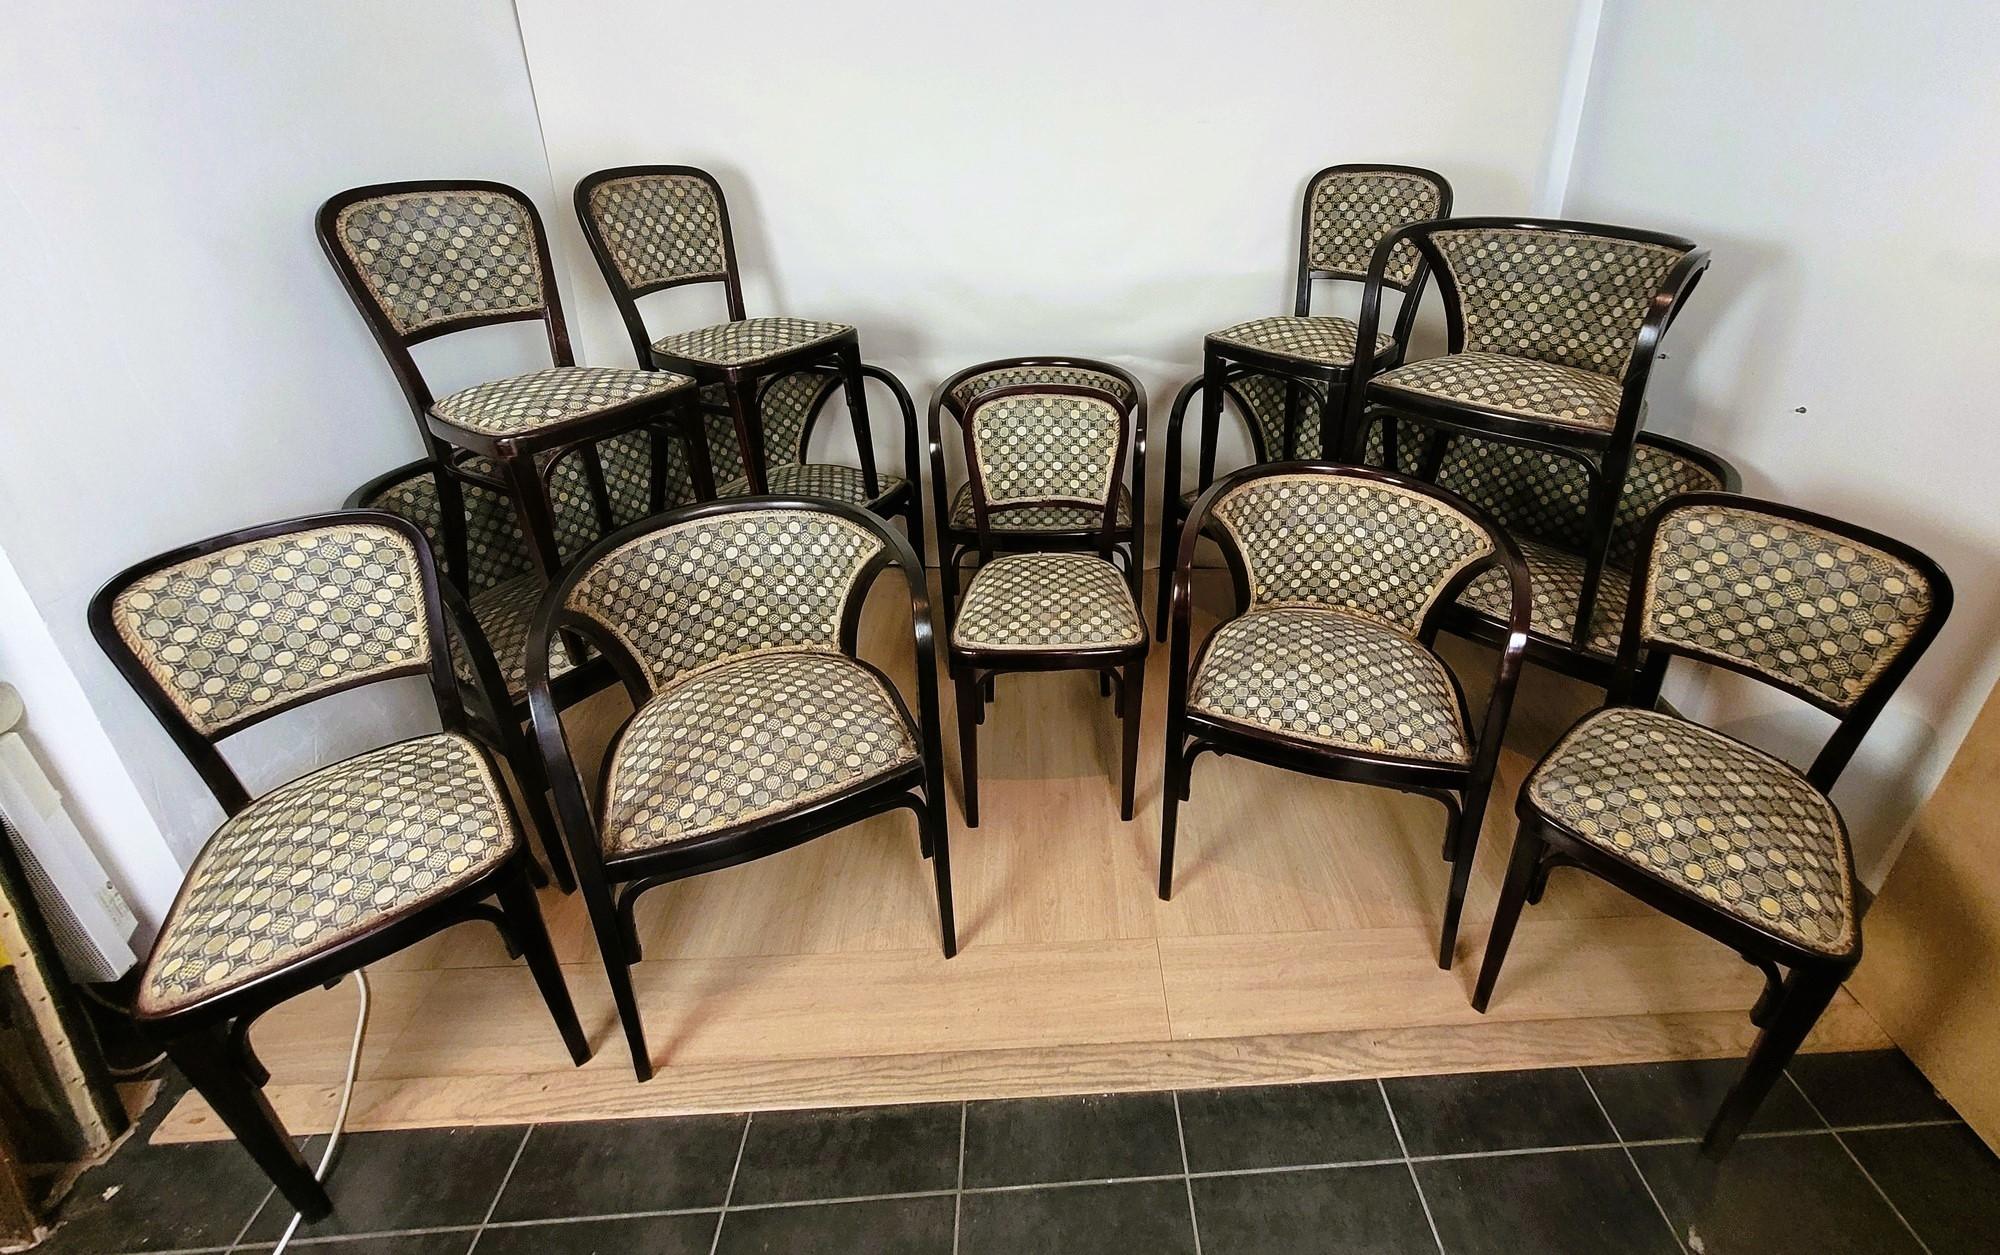 Beautiful living room set composed of 2 sofas, 4 armchairs and 6 chairs, characteristic of Thonet's work: curved lines of the wood of the armrests, backrests...

Good general condition: clean fabrics and upholstery which seem original, some wear and